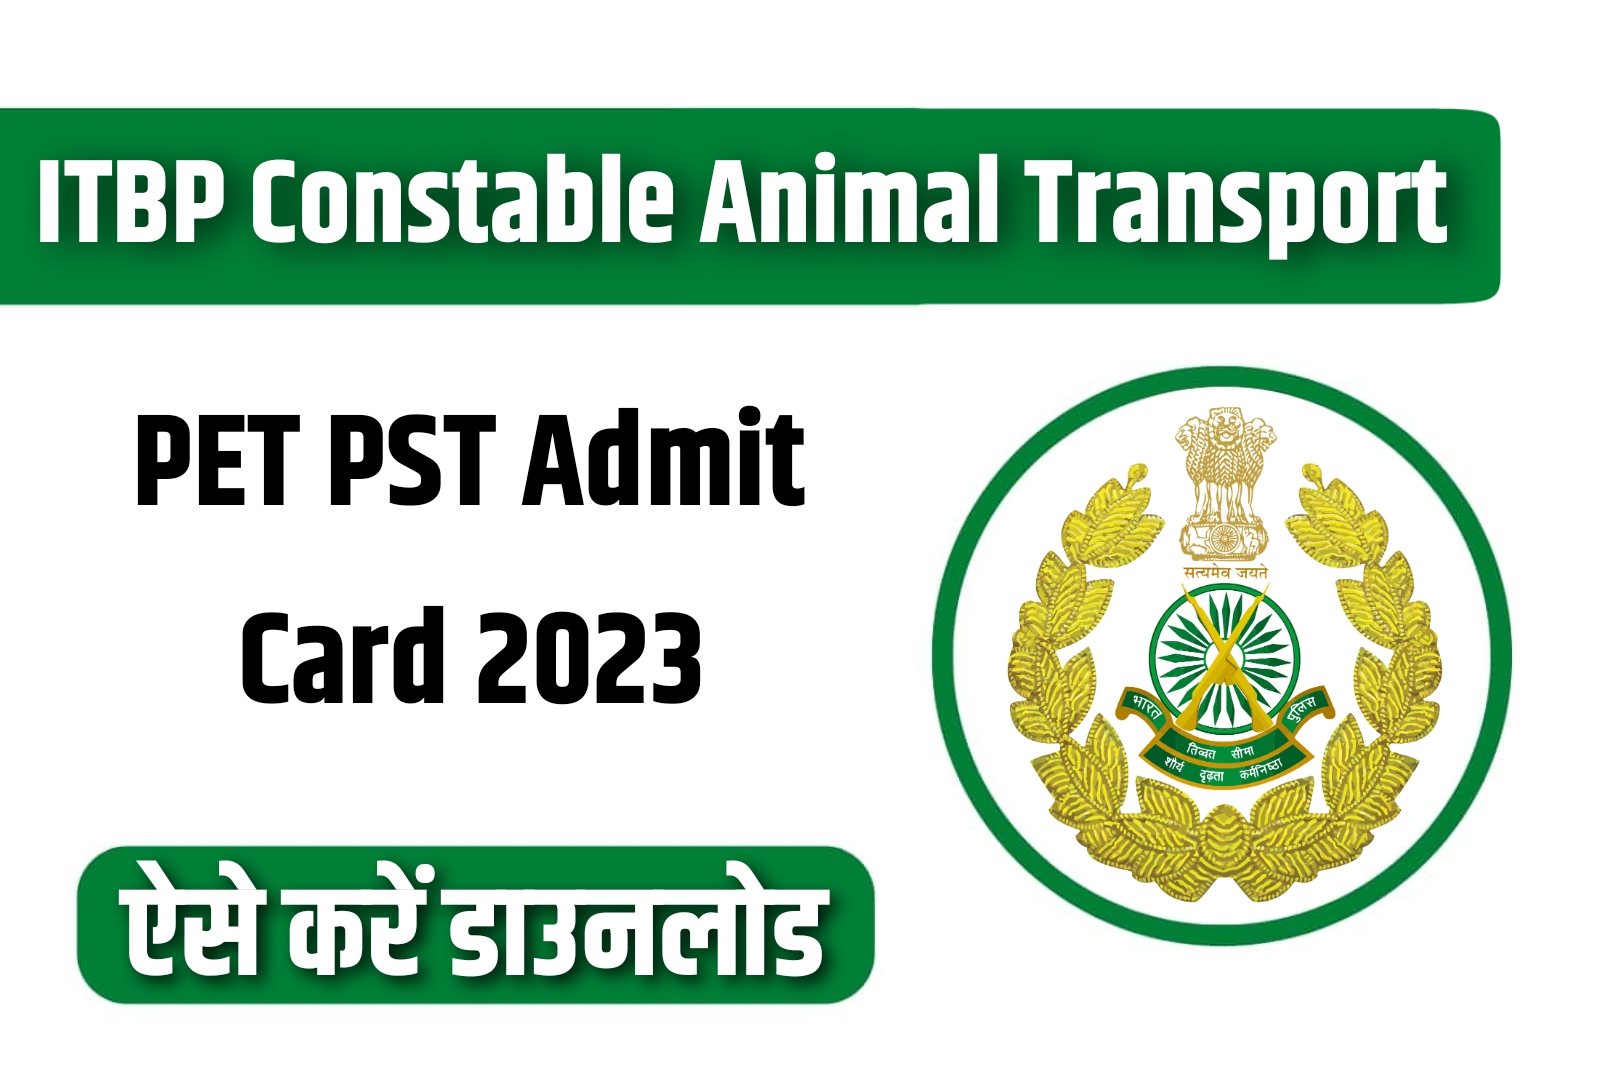 ITBP Constable Animal Transport PET PST Admit Card 2023